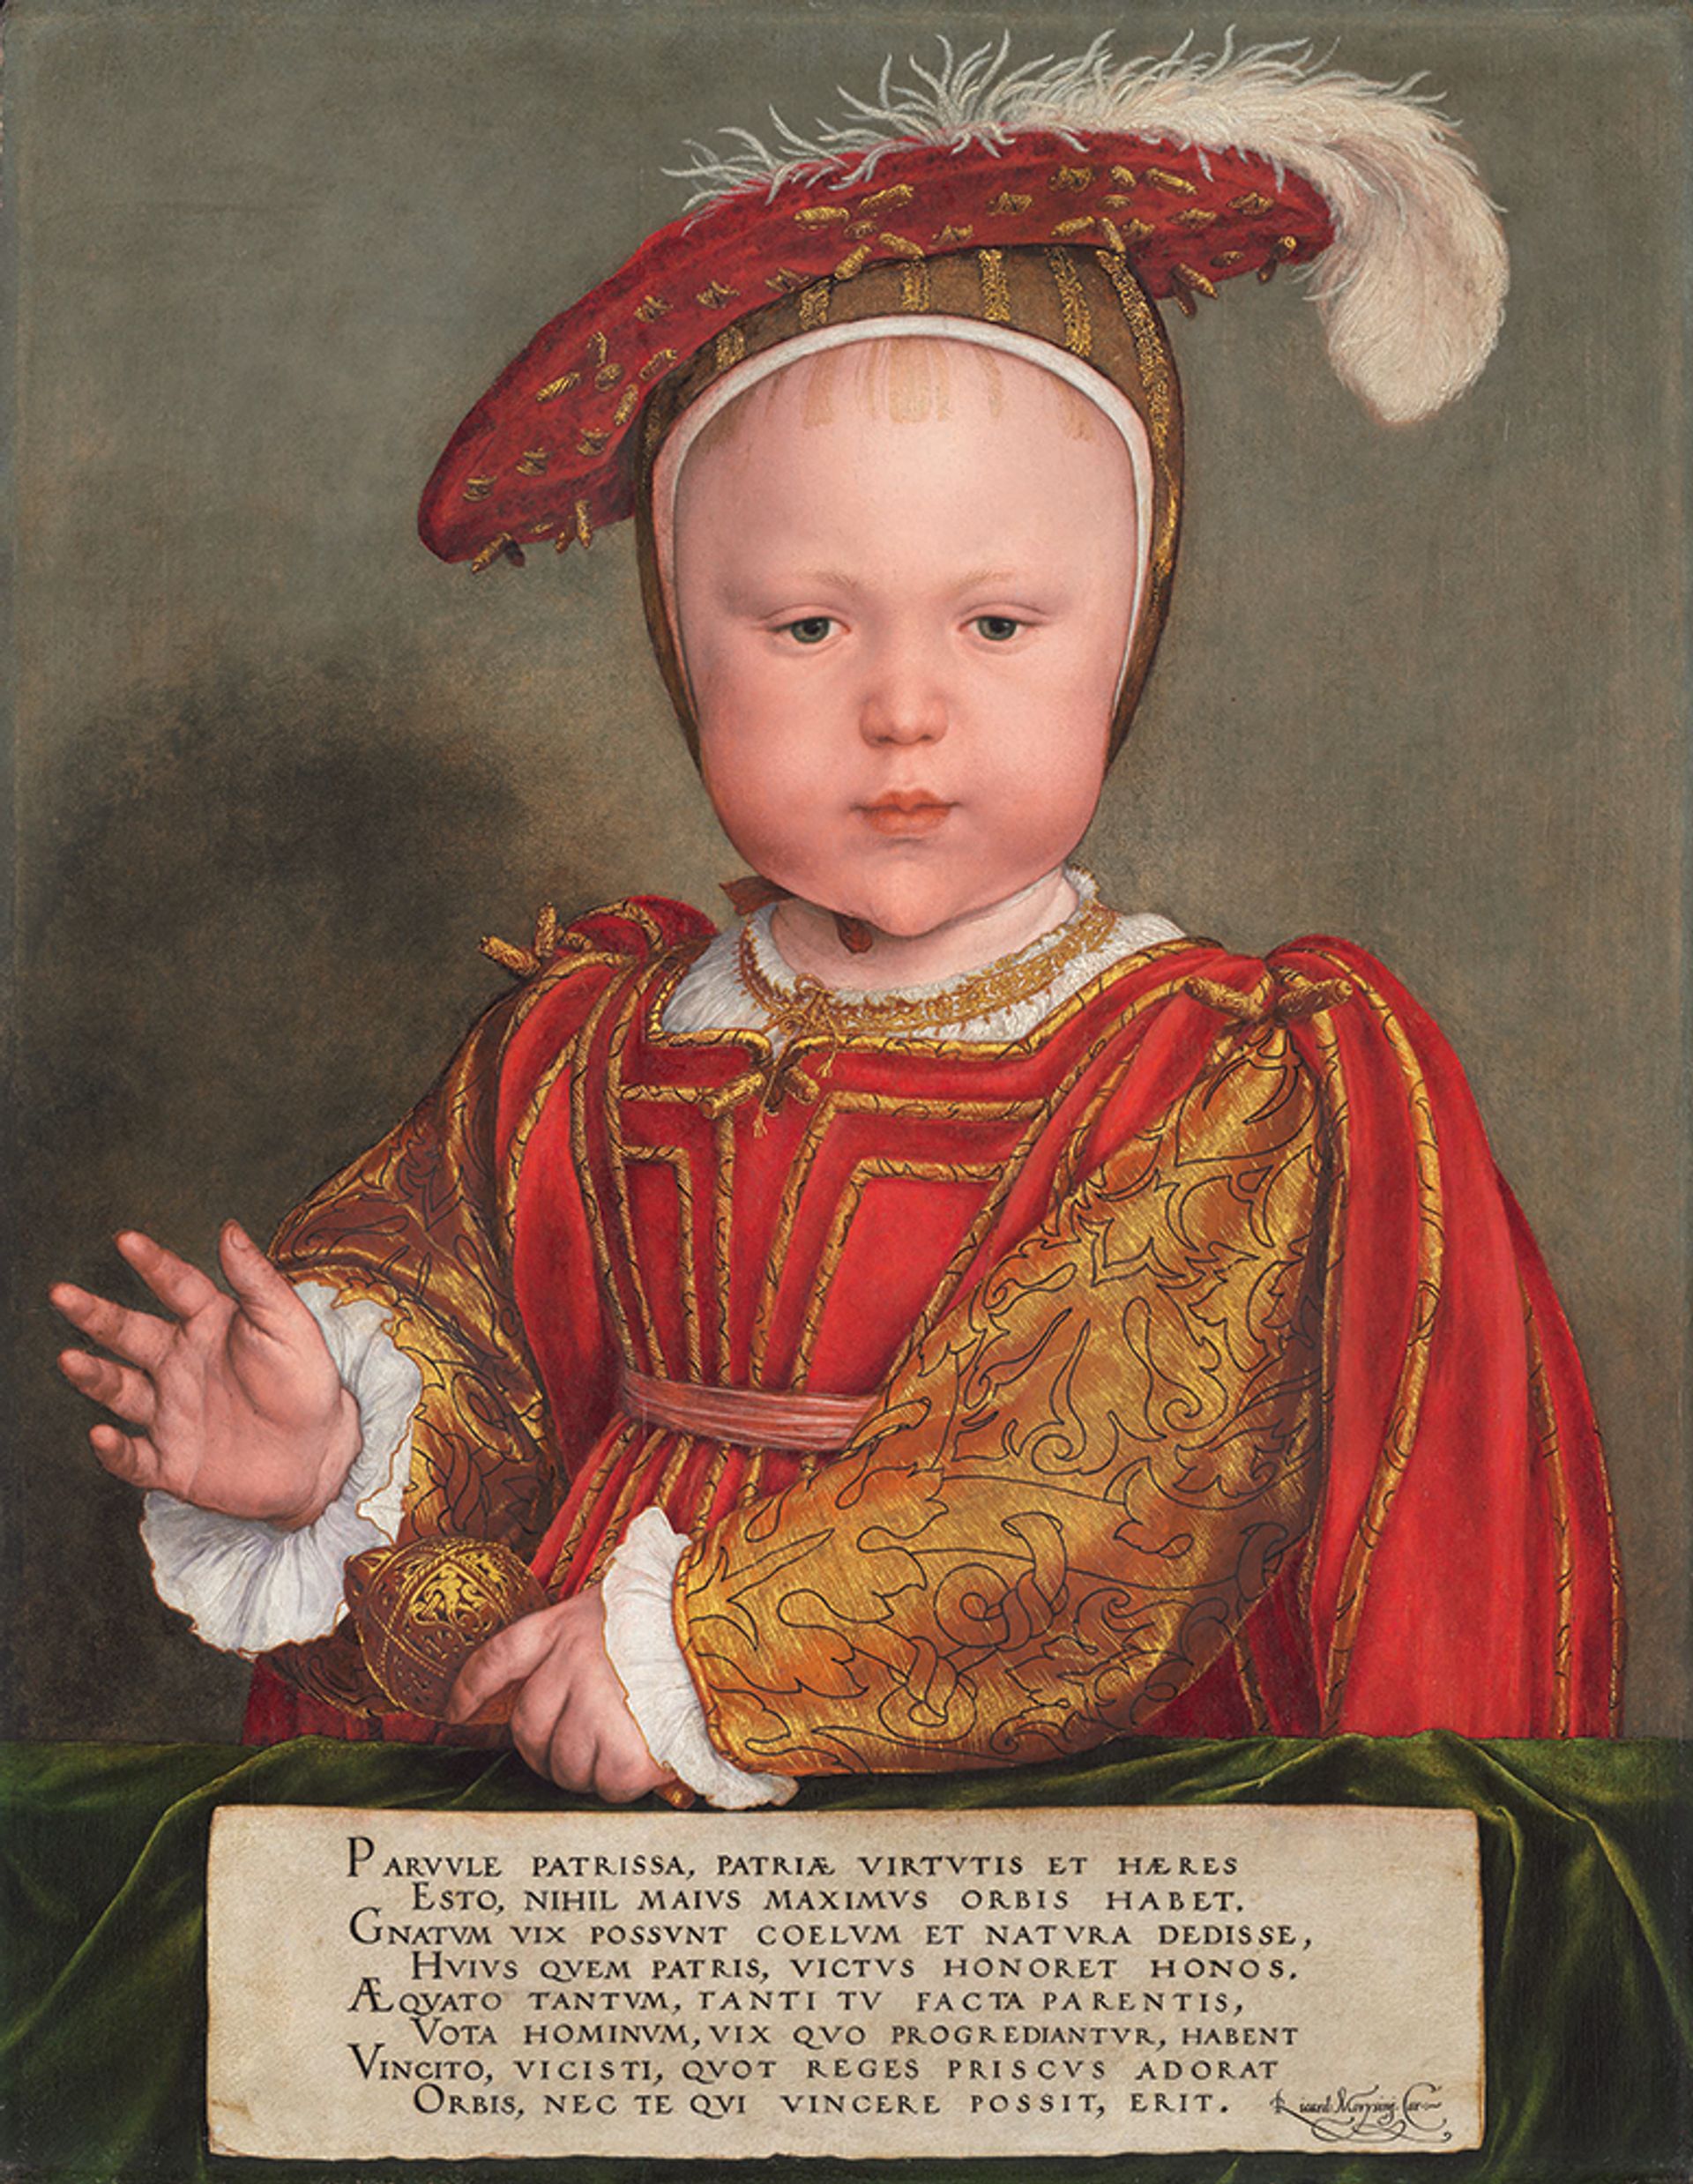 Hans Holbein the Younger’s Edward VI as a Child (around 1538), from the National Gallery of Art in Washington, DC

Courtesy of National Gallery of Art, Washington, DC